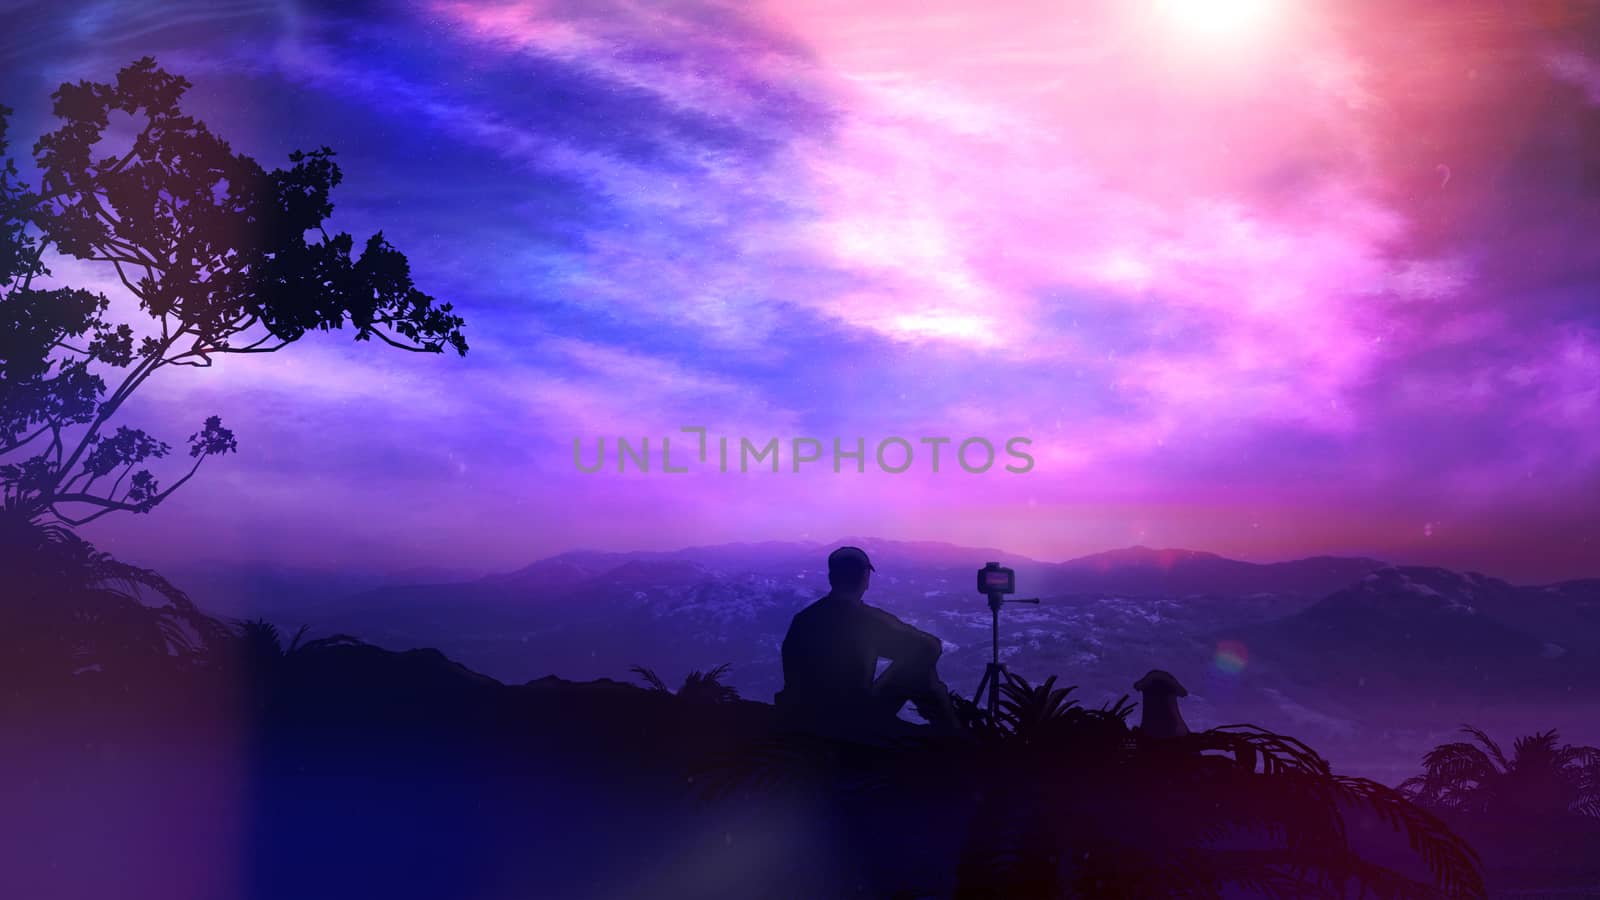 The Photographer Shoots A Fantastic Dawn In The Mountains by ConceptCafe